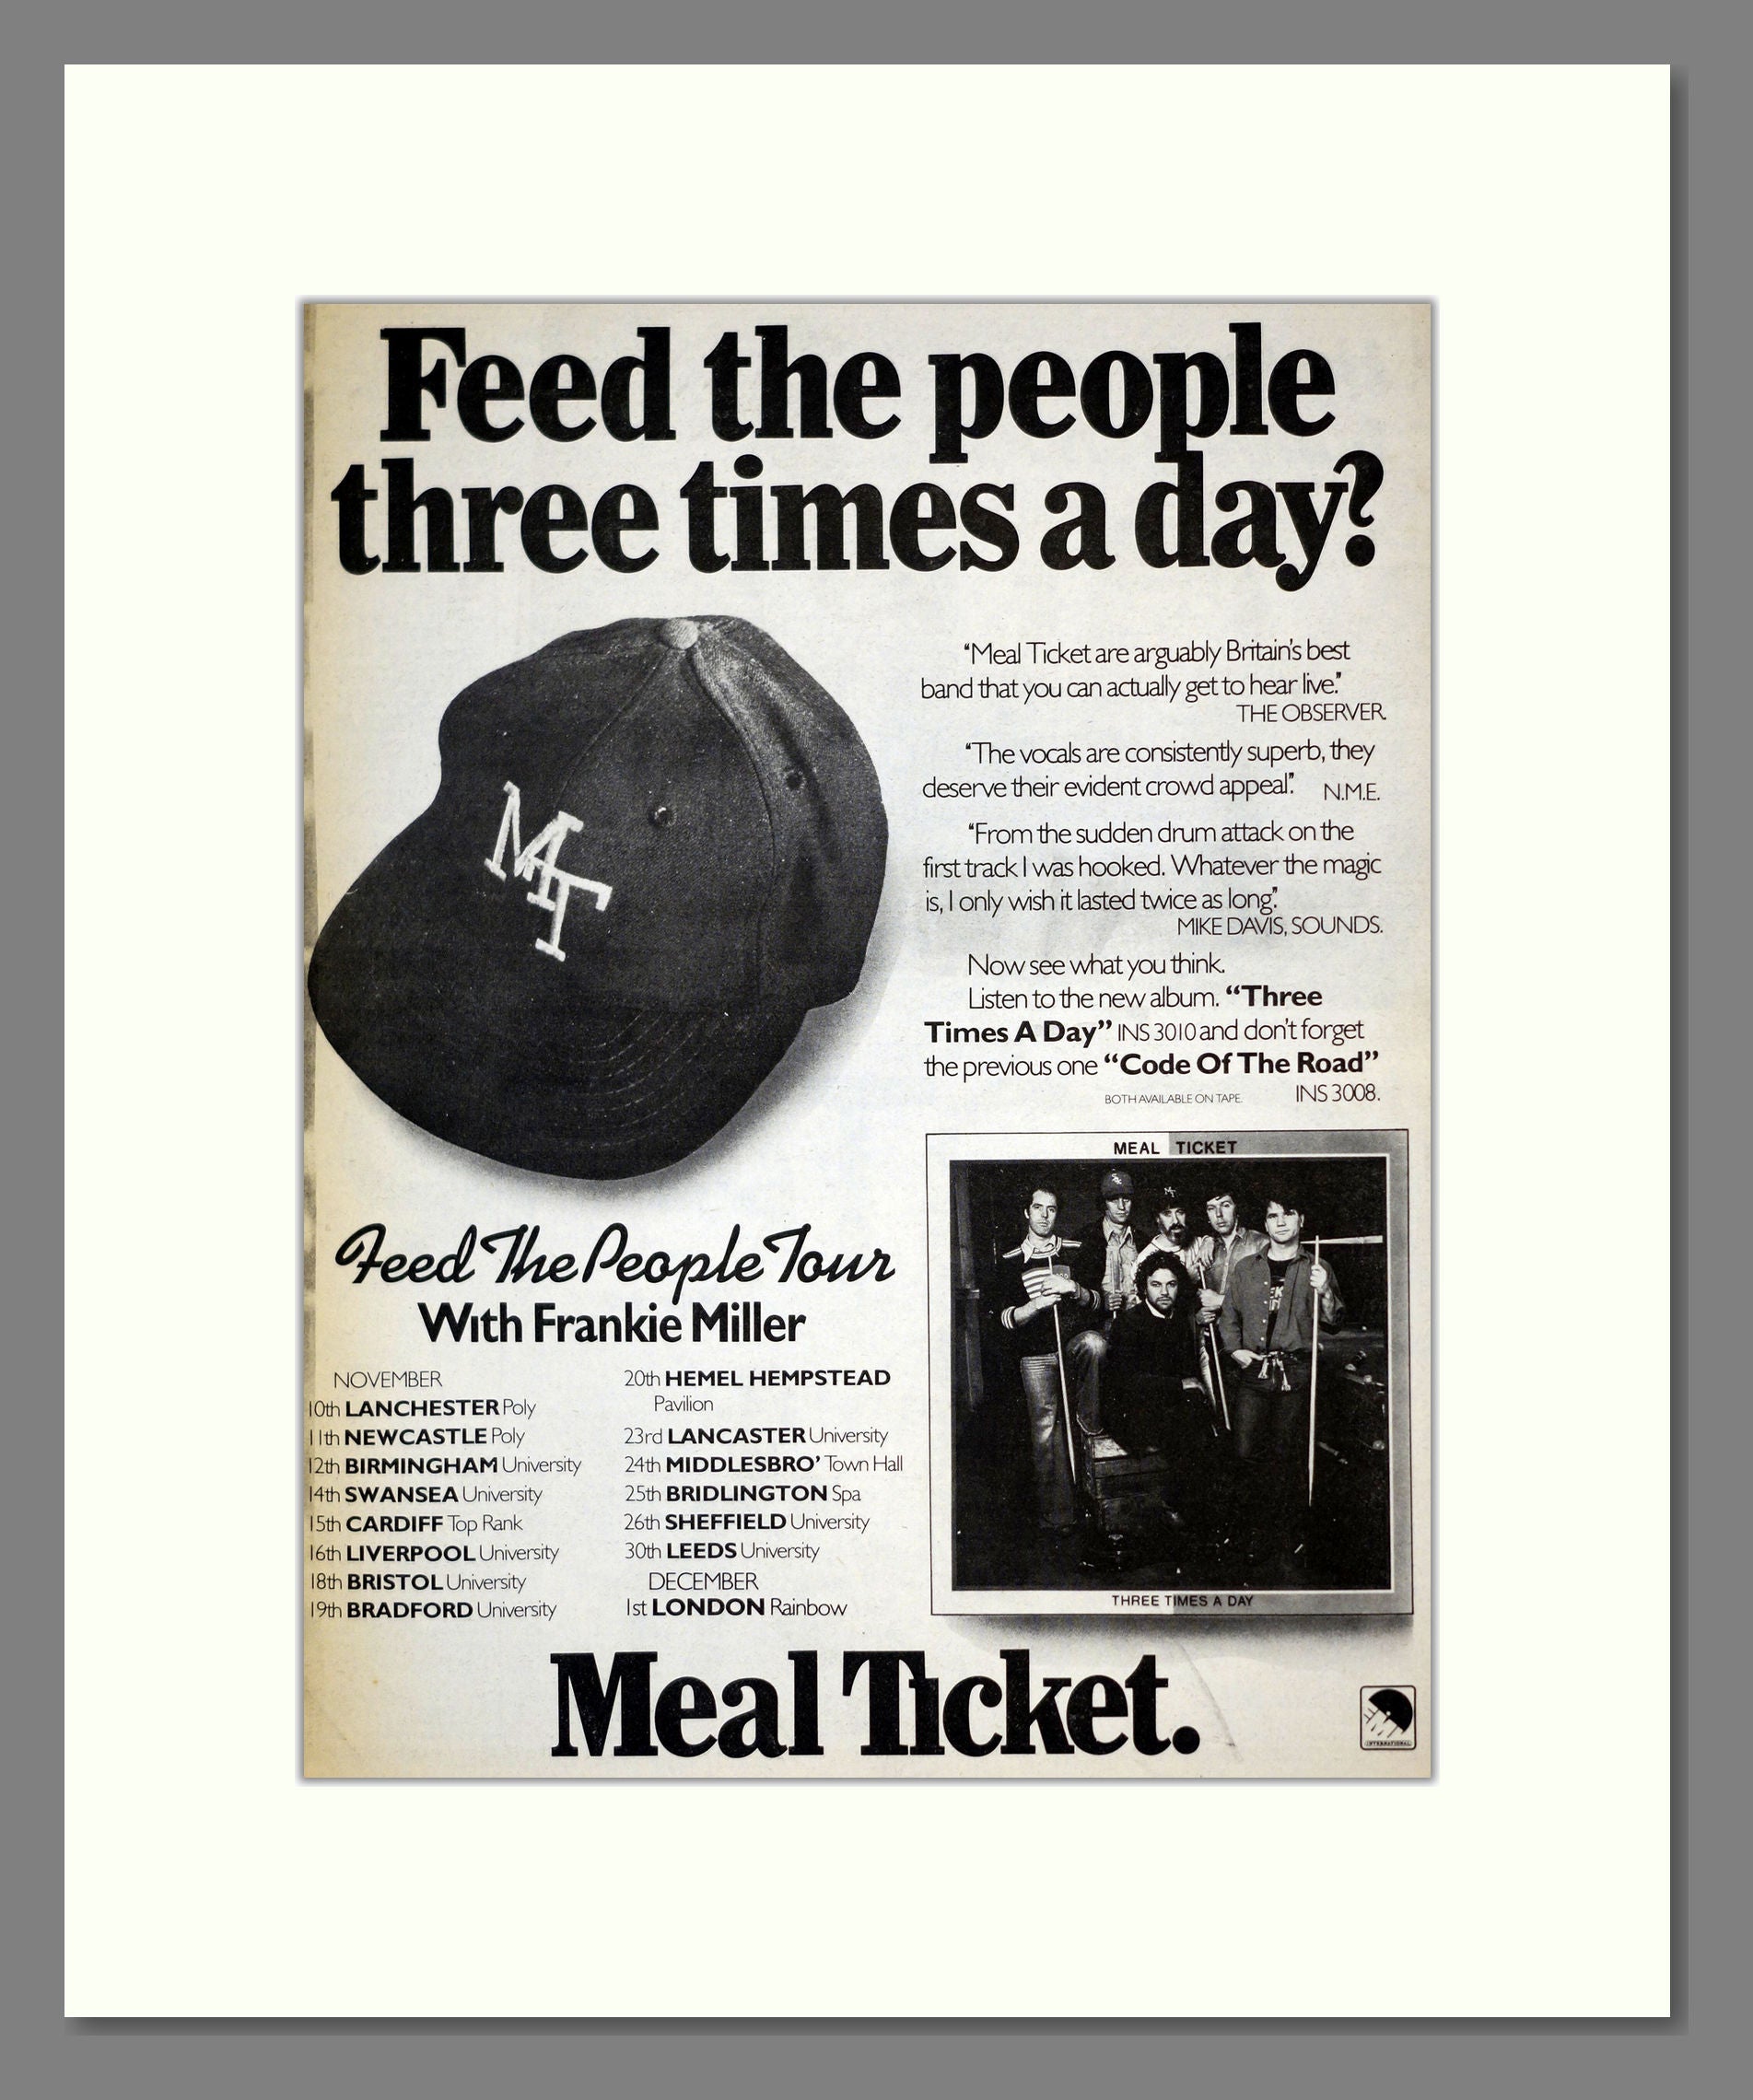 Meal Ticket - Feed The People Tour. Vintage Advert 1977 (ref AD17695)